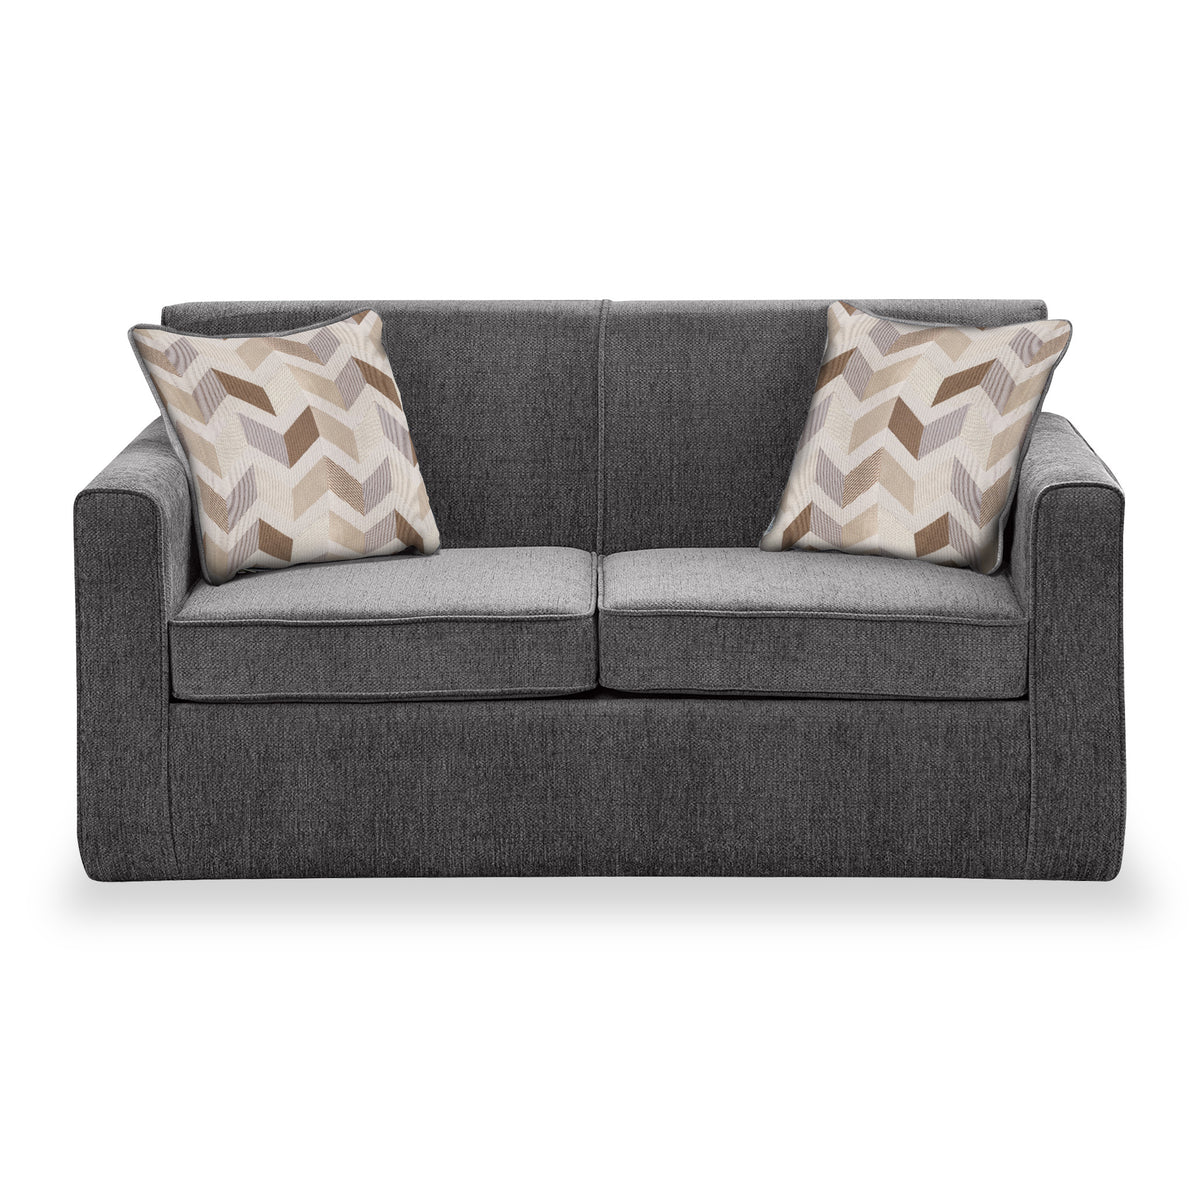 Welton Charcoal Soft Weave 2 Seater Sofa Bed with Morelisa Oatmeal Cushions